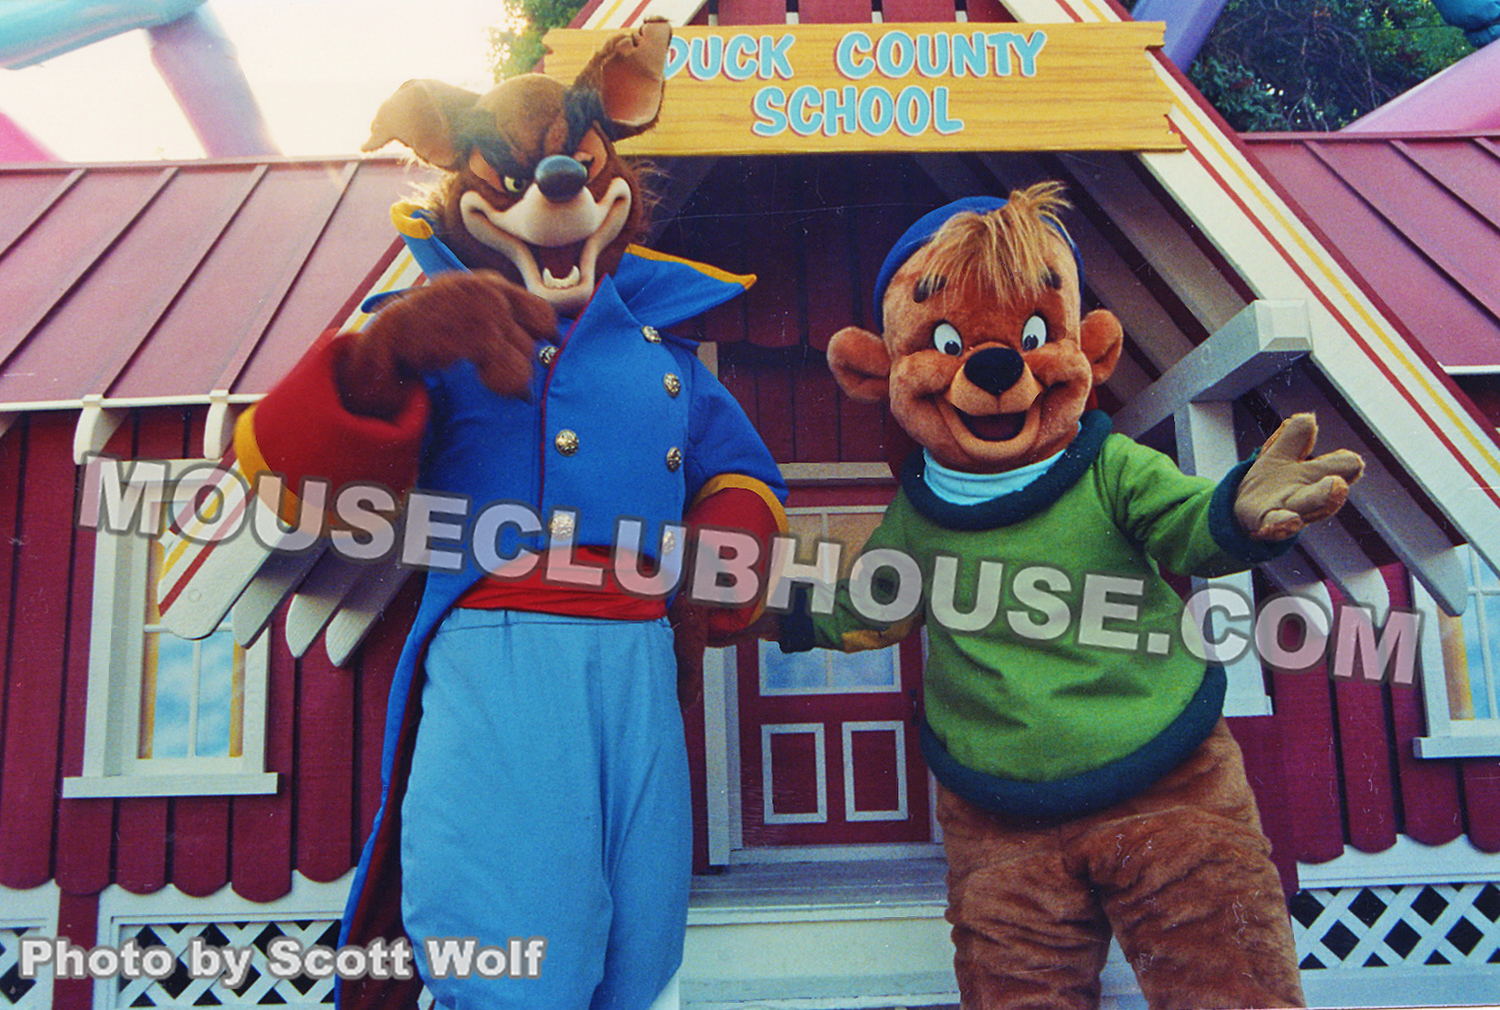 Mixing up shows, characters from TaleSpin pose in front of the DuckTales school in Disneyland